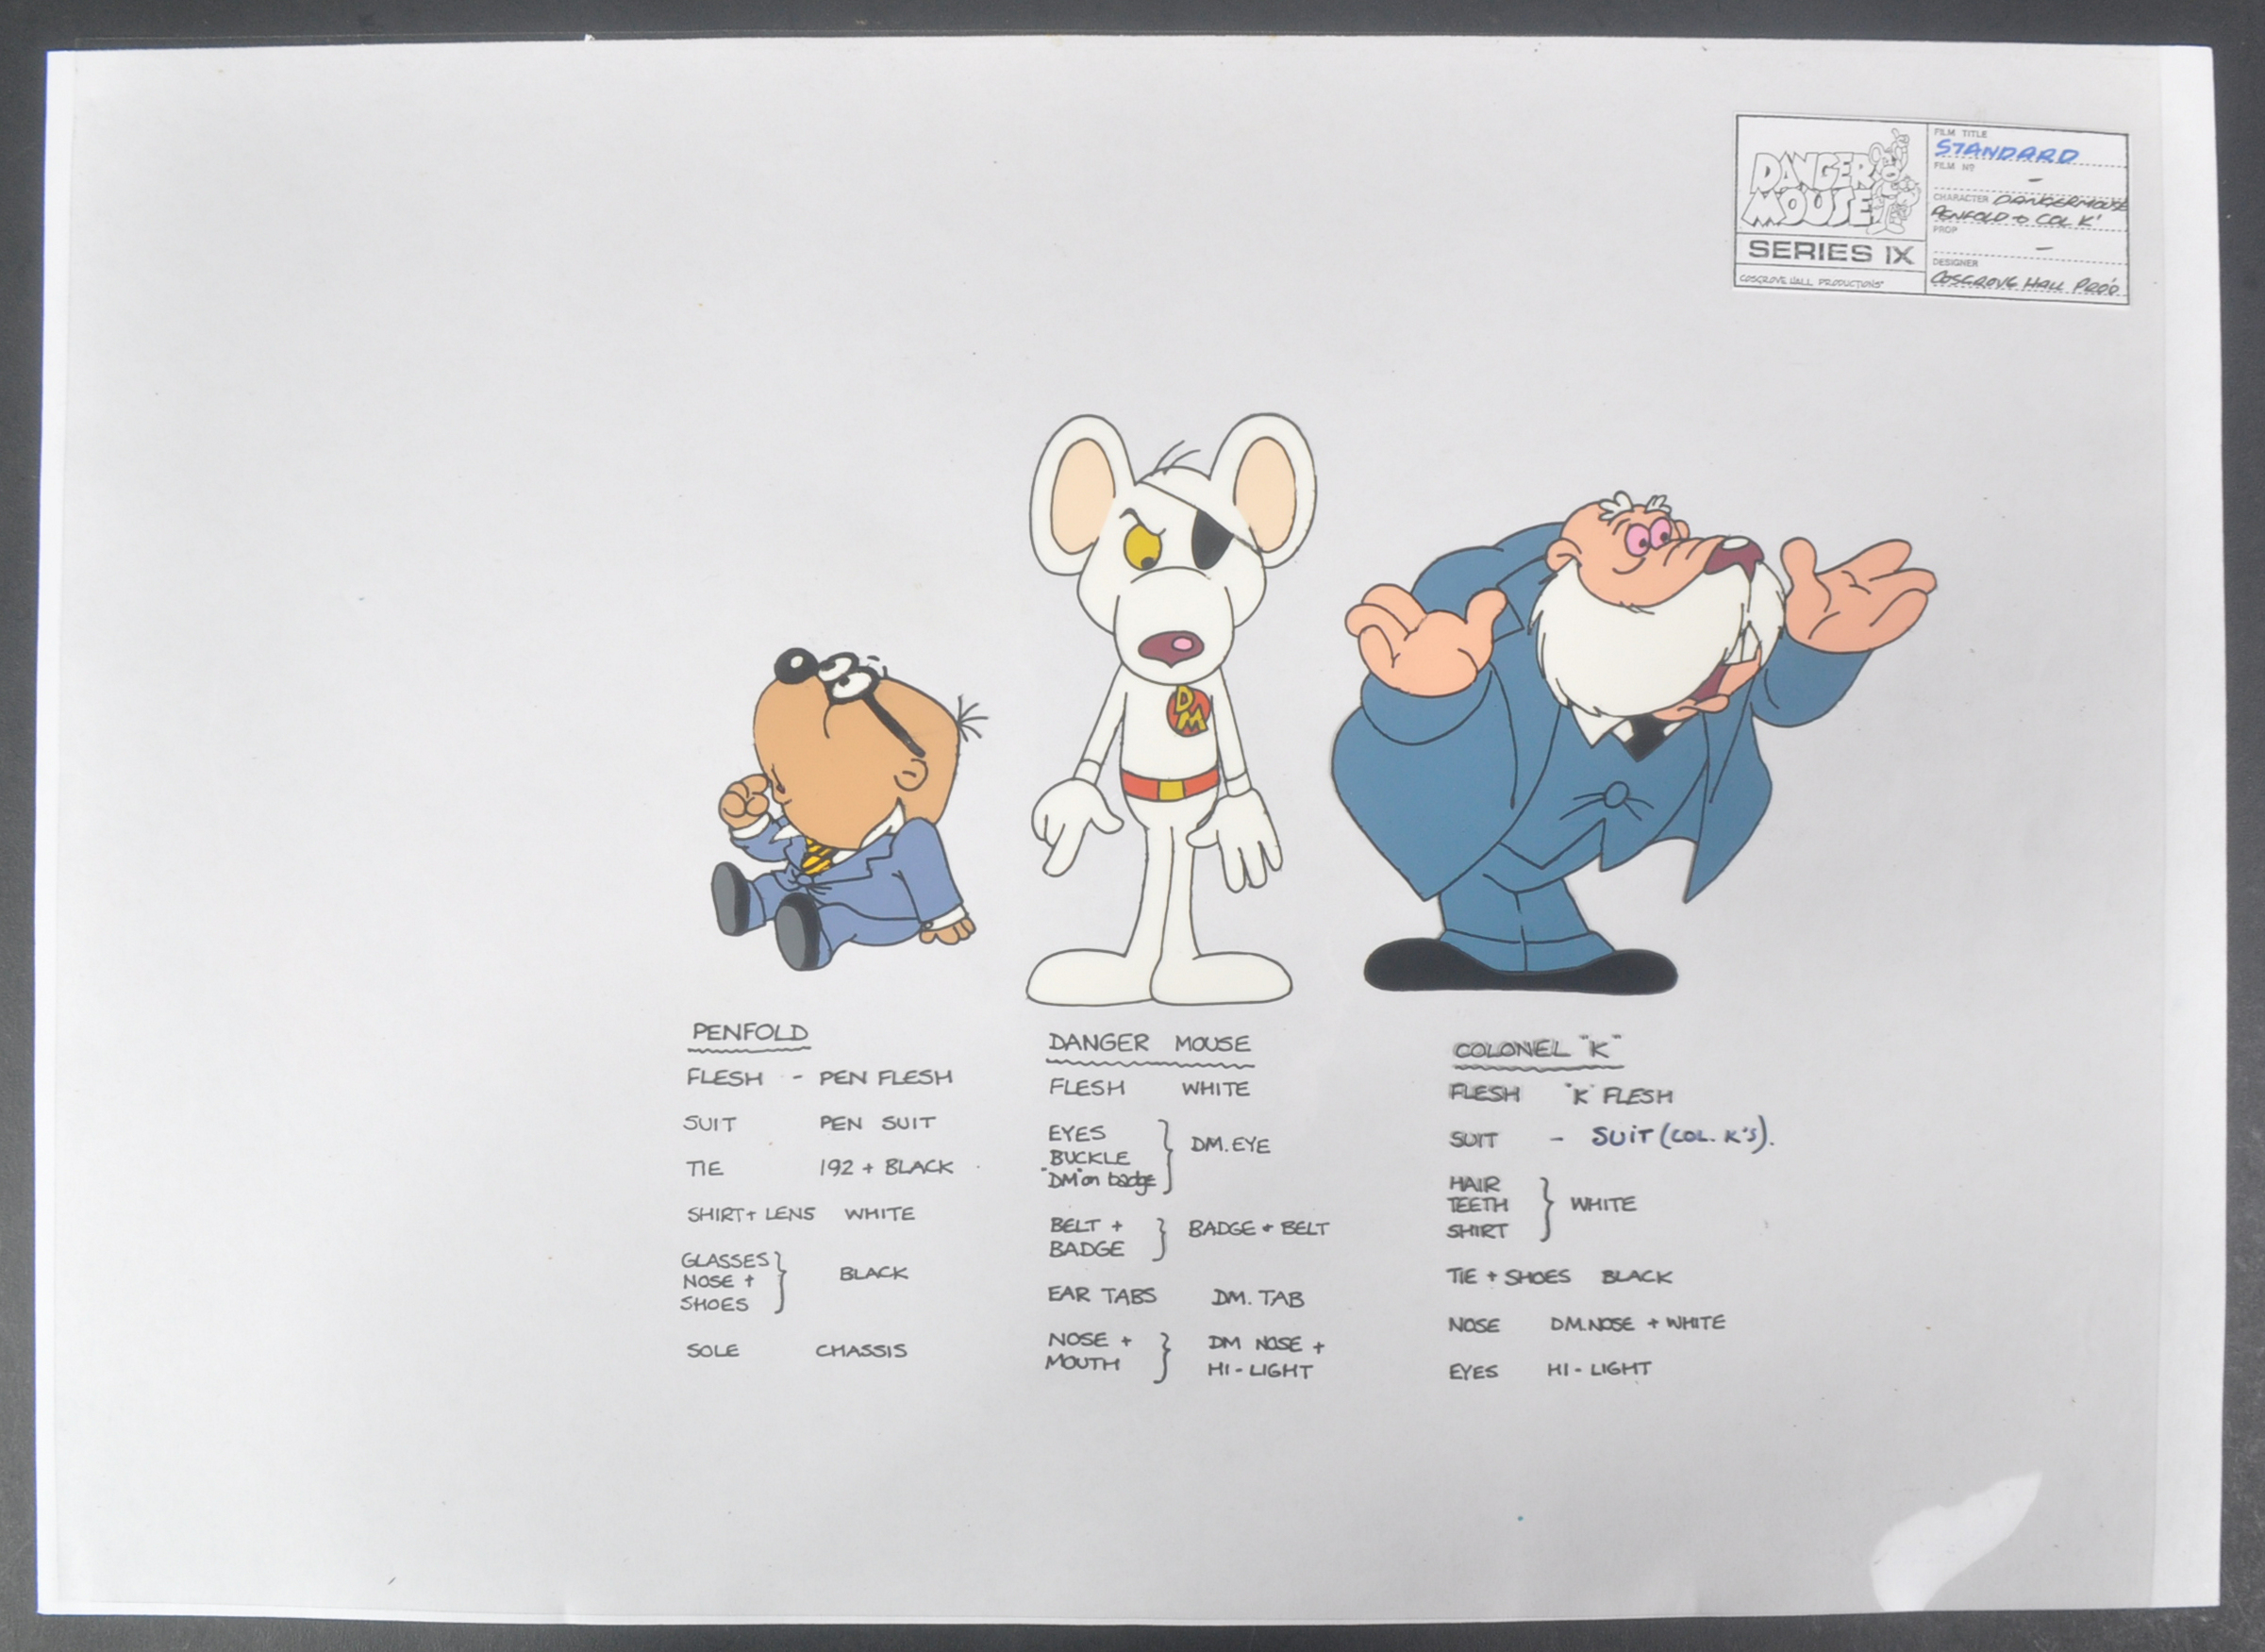 DANGER MOUSE (1981) – COSGROVE HALL FILMS – PRODUCTION USED ARTWORK